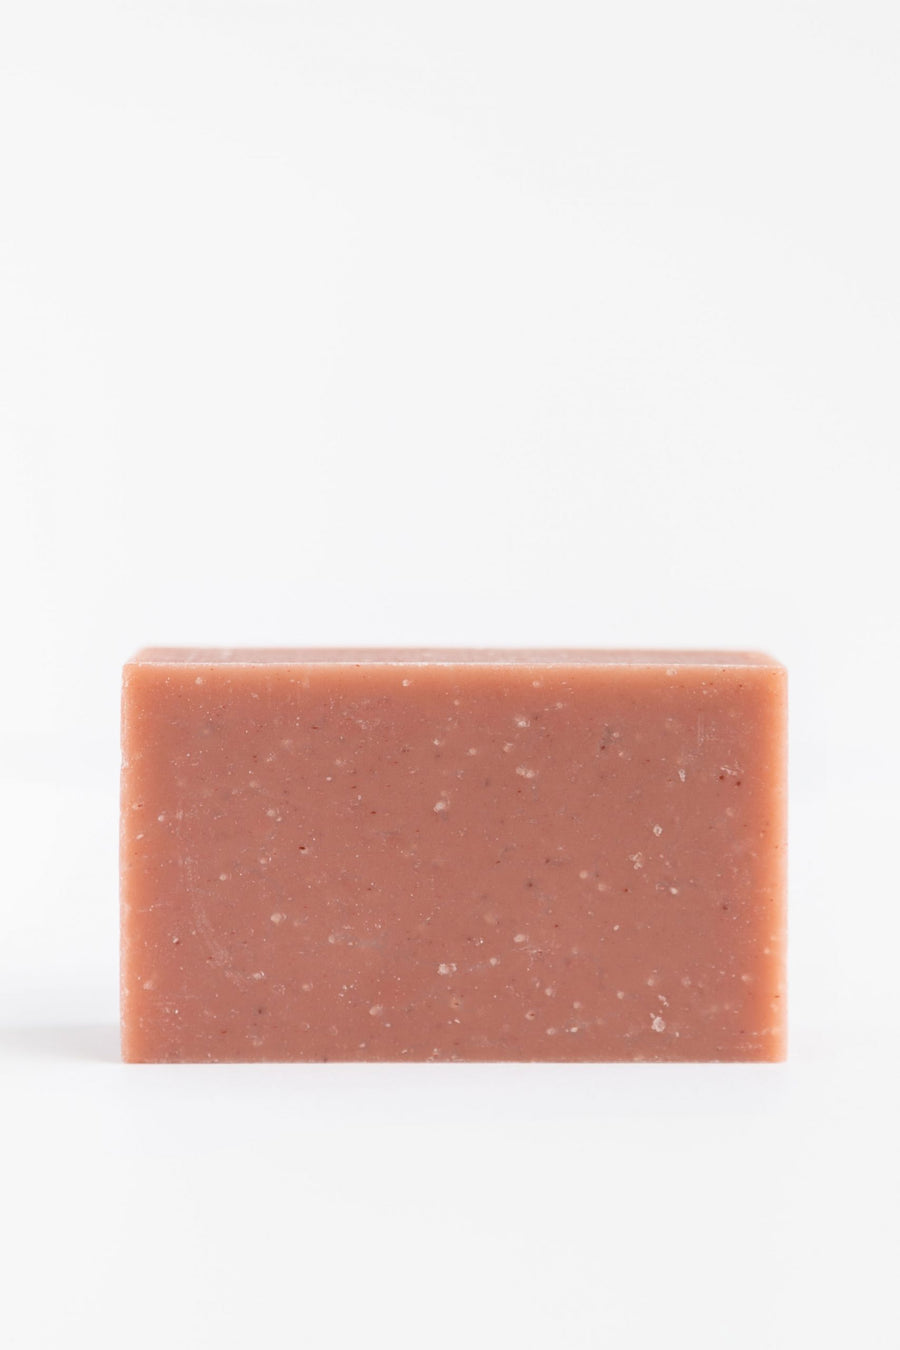 Exfoliating Pink Clay Face and Body Soap